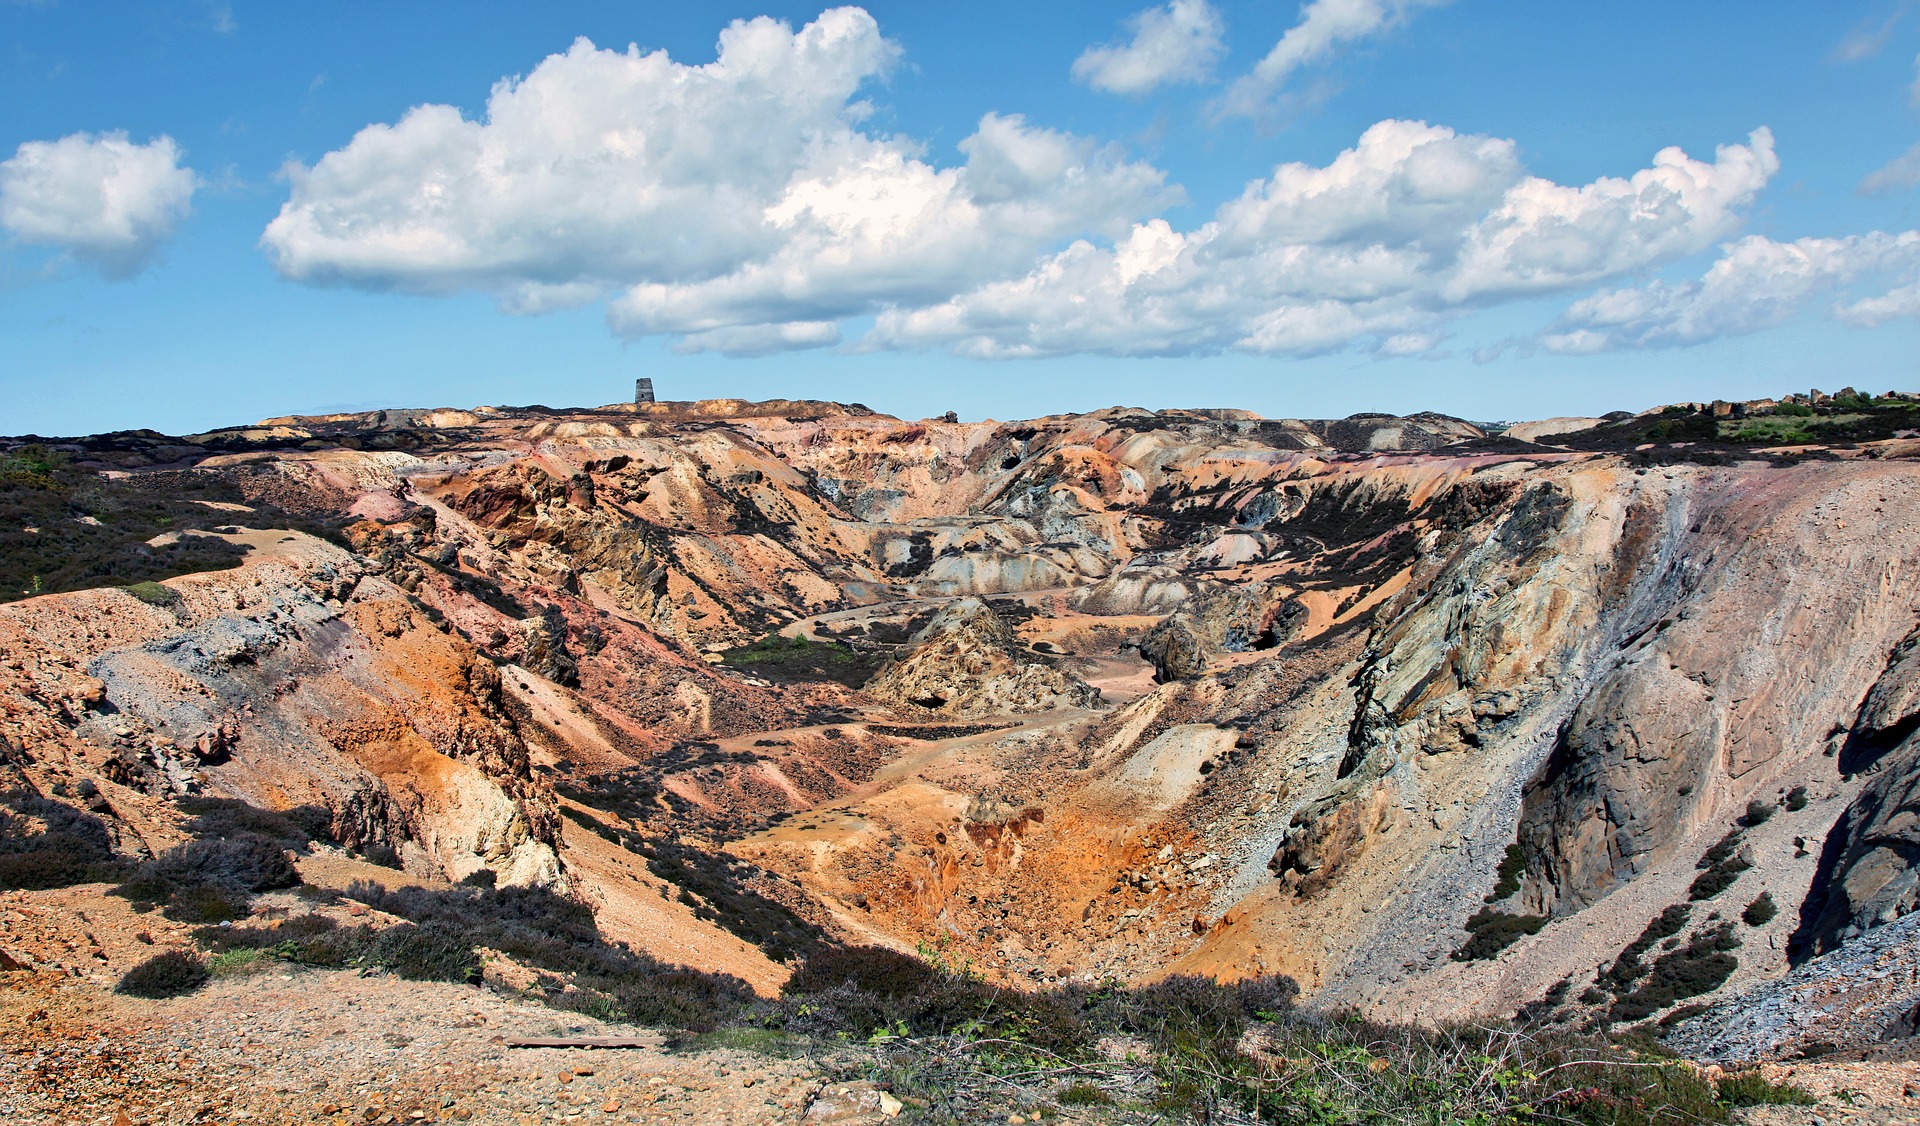 Parys Mountain where you can see evidence of copper mining in the 1800s